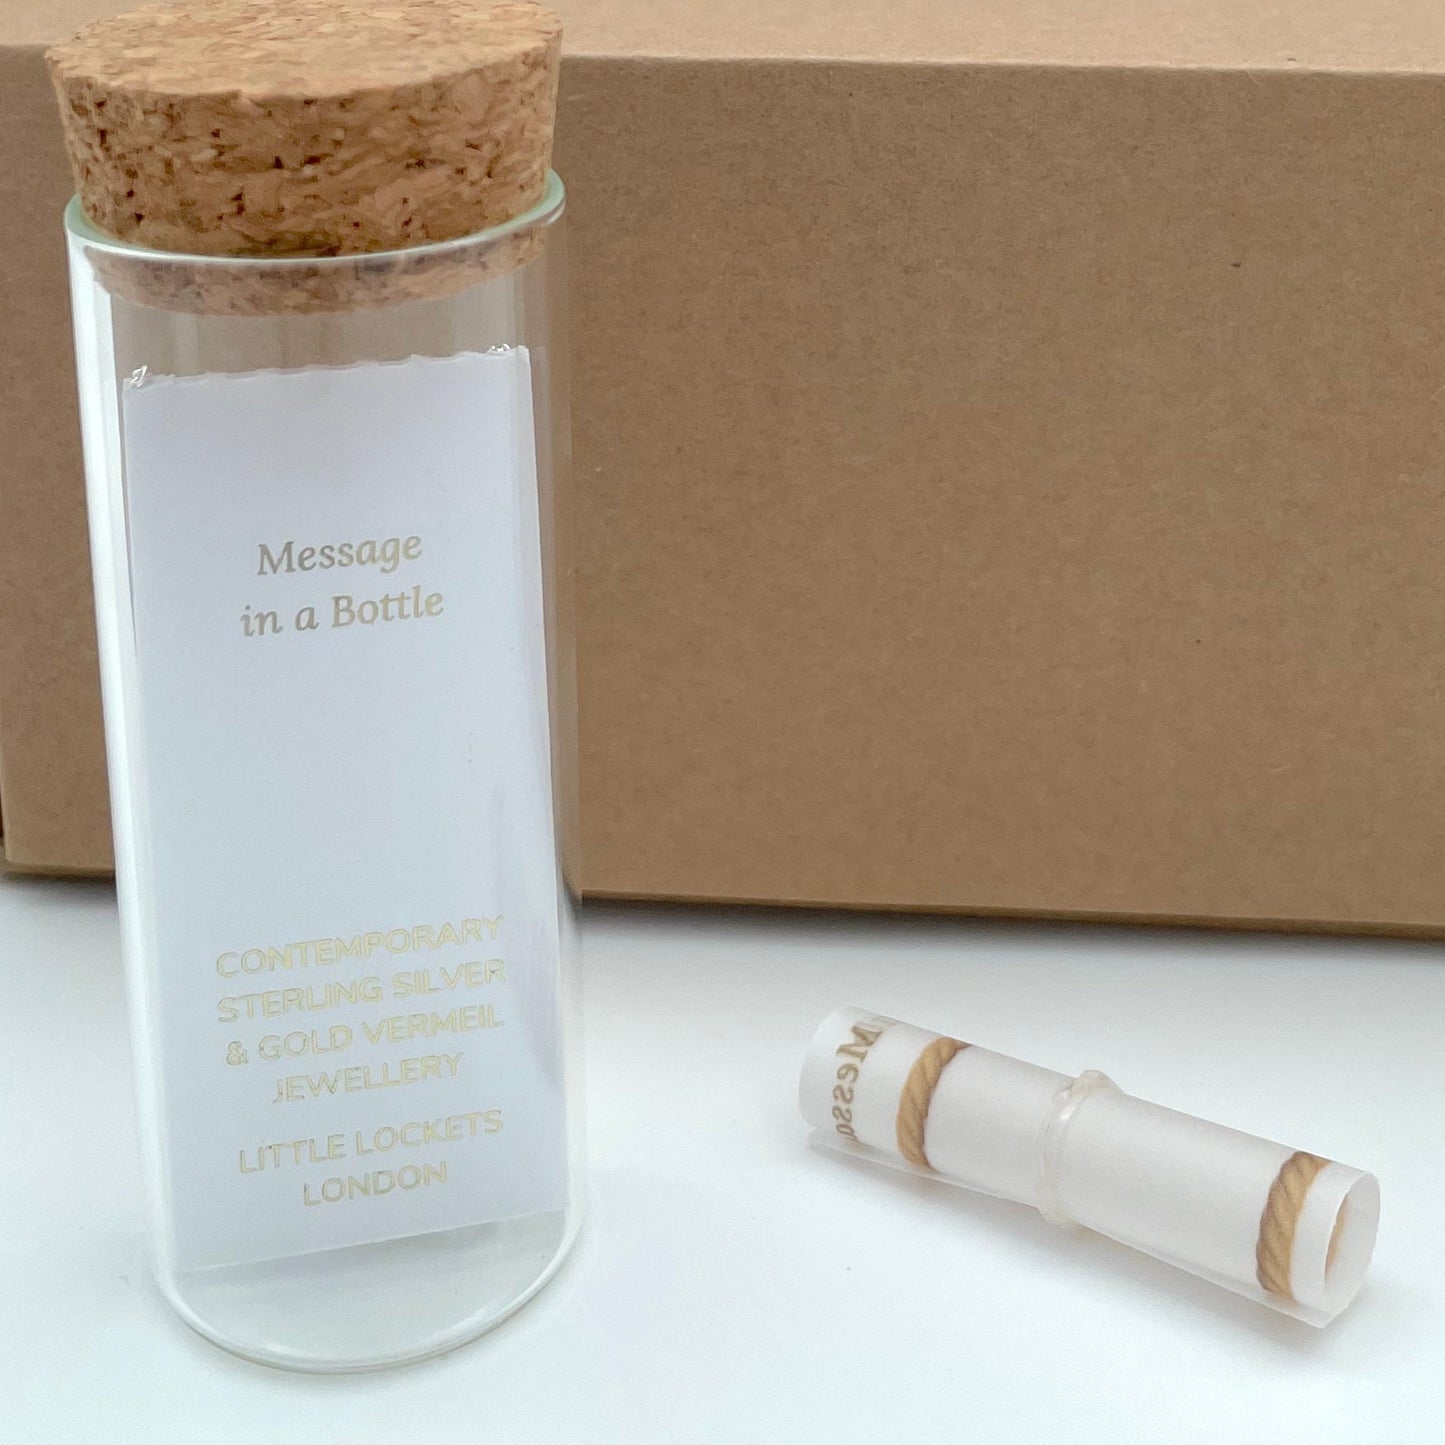 Reverse of Message in a Bottle jewellery showing card and scroll